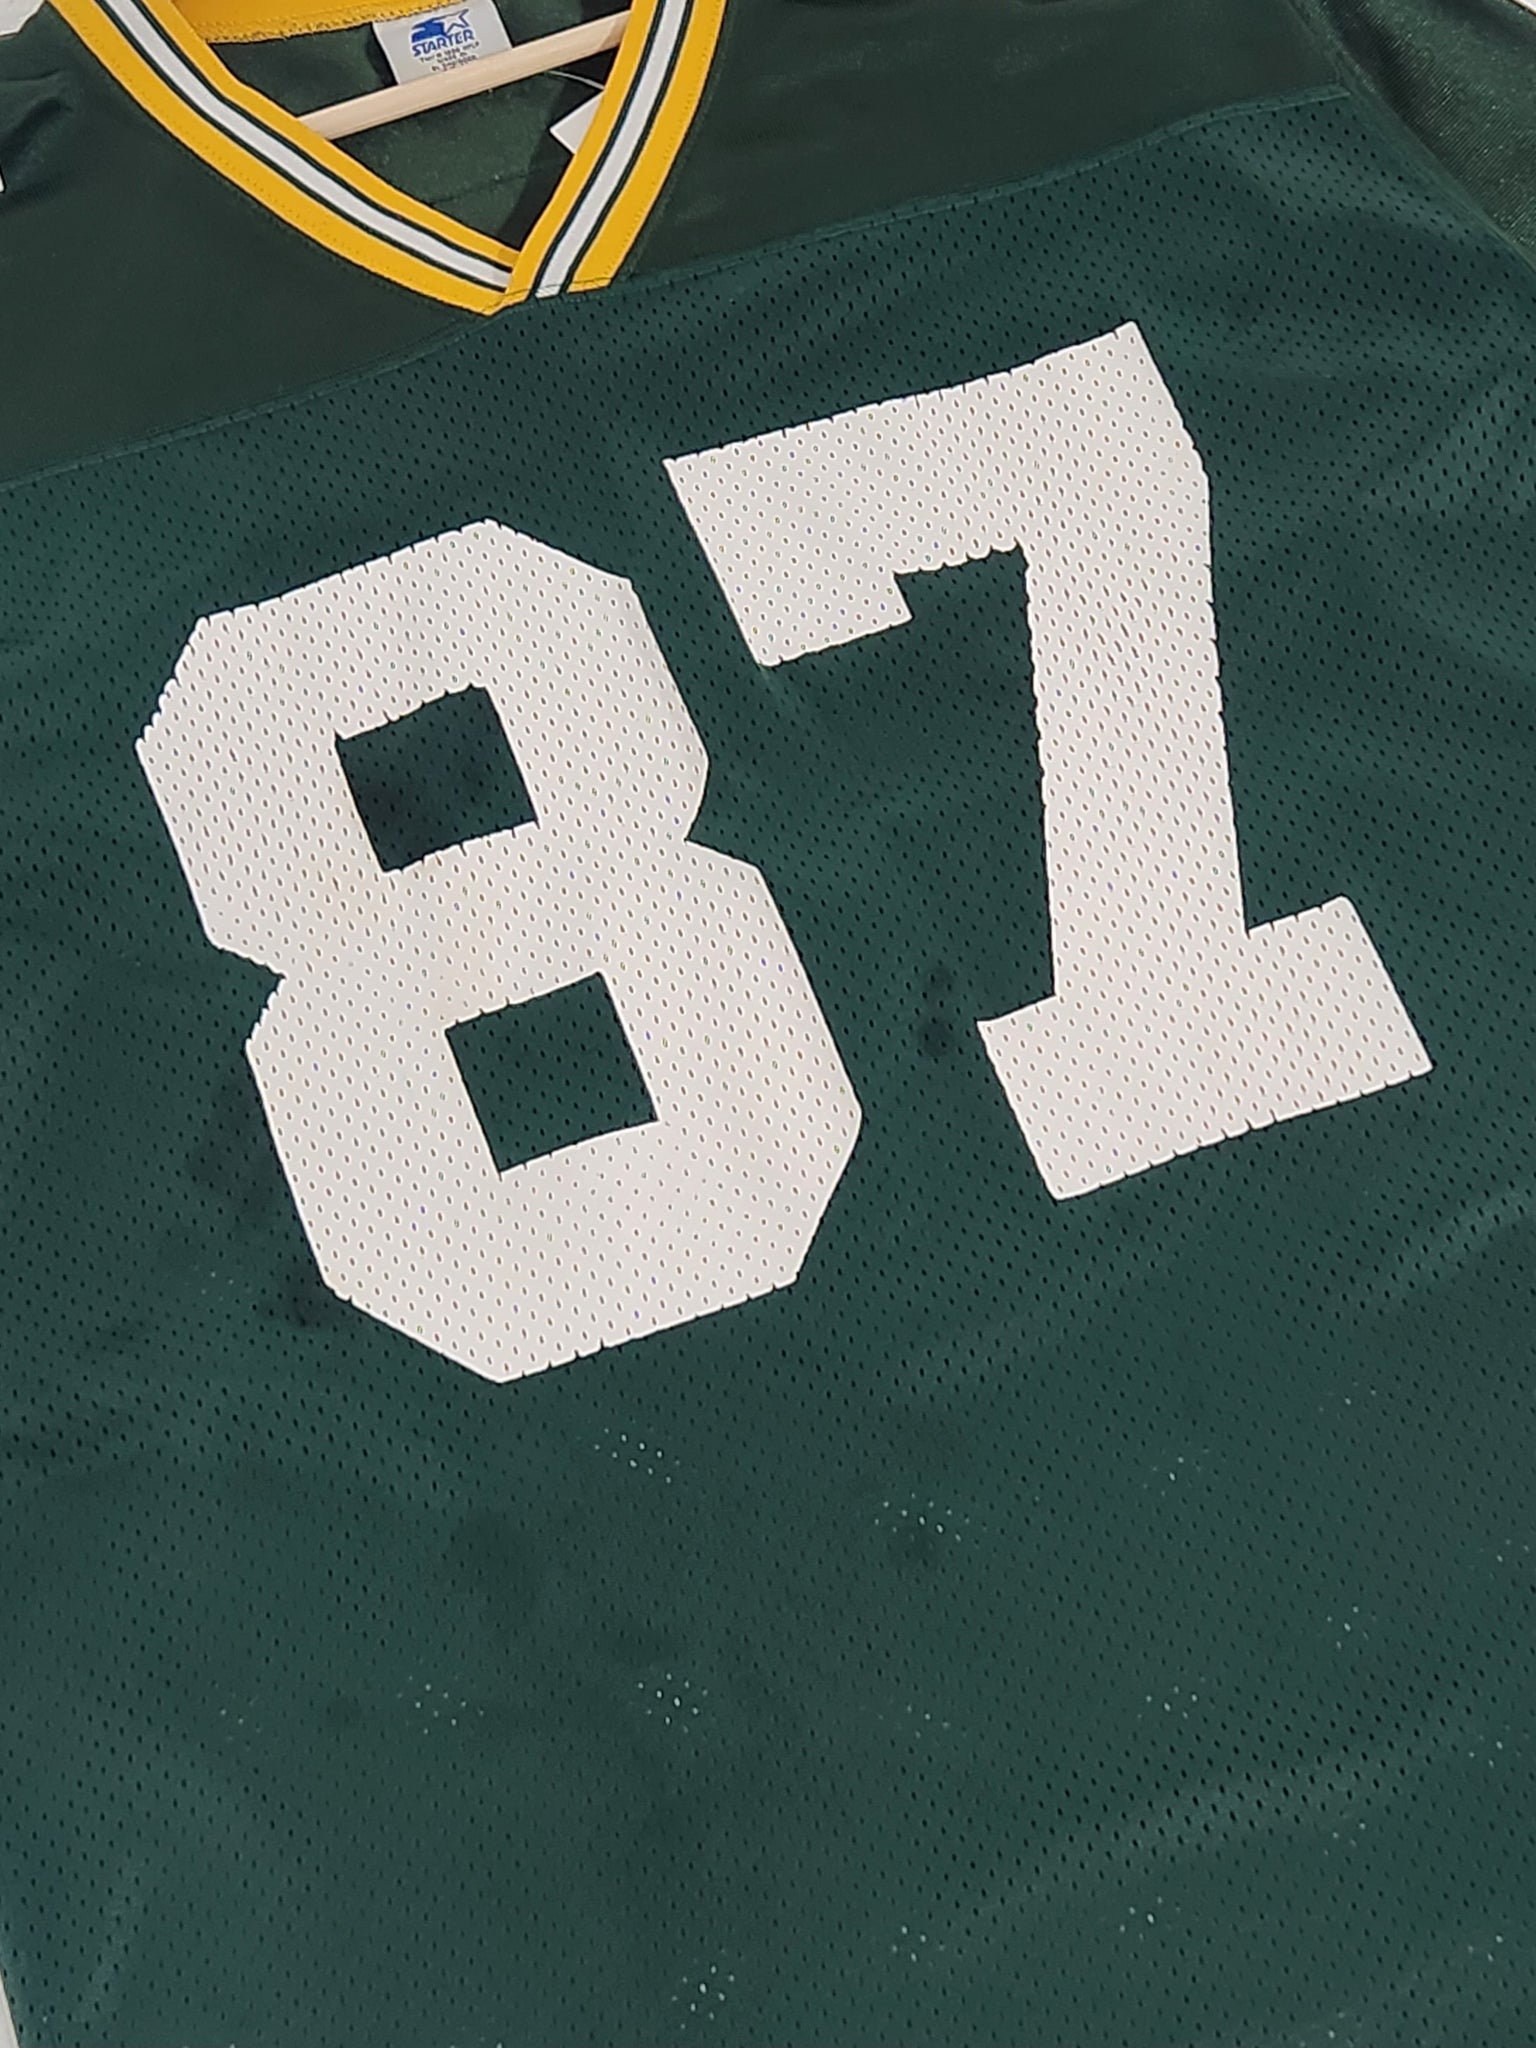 packers nike jersey